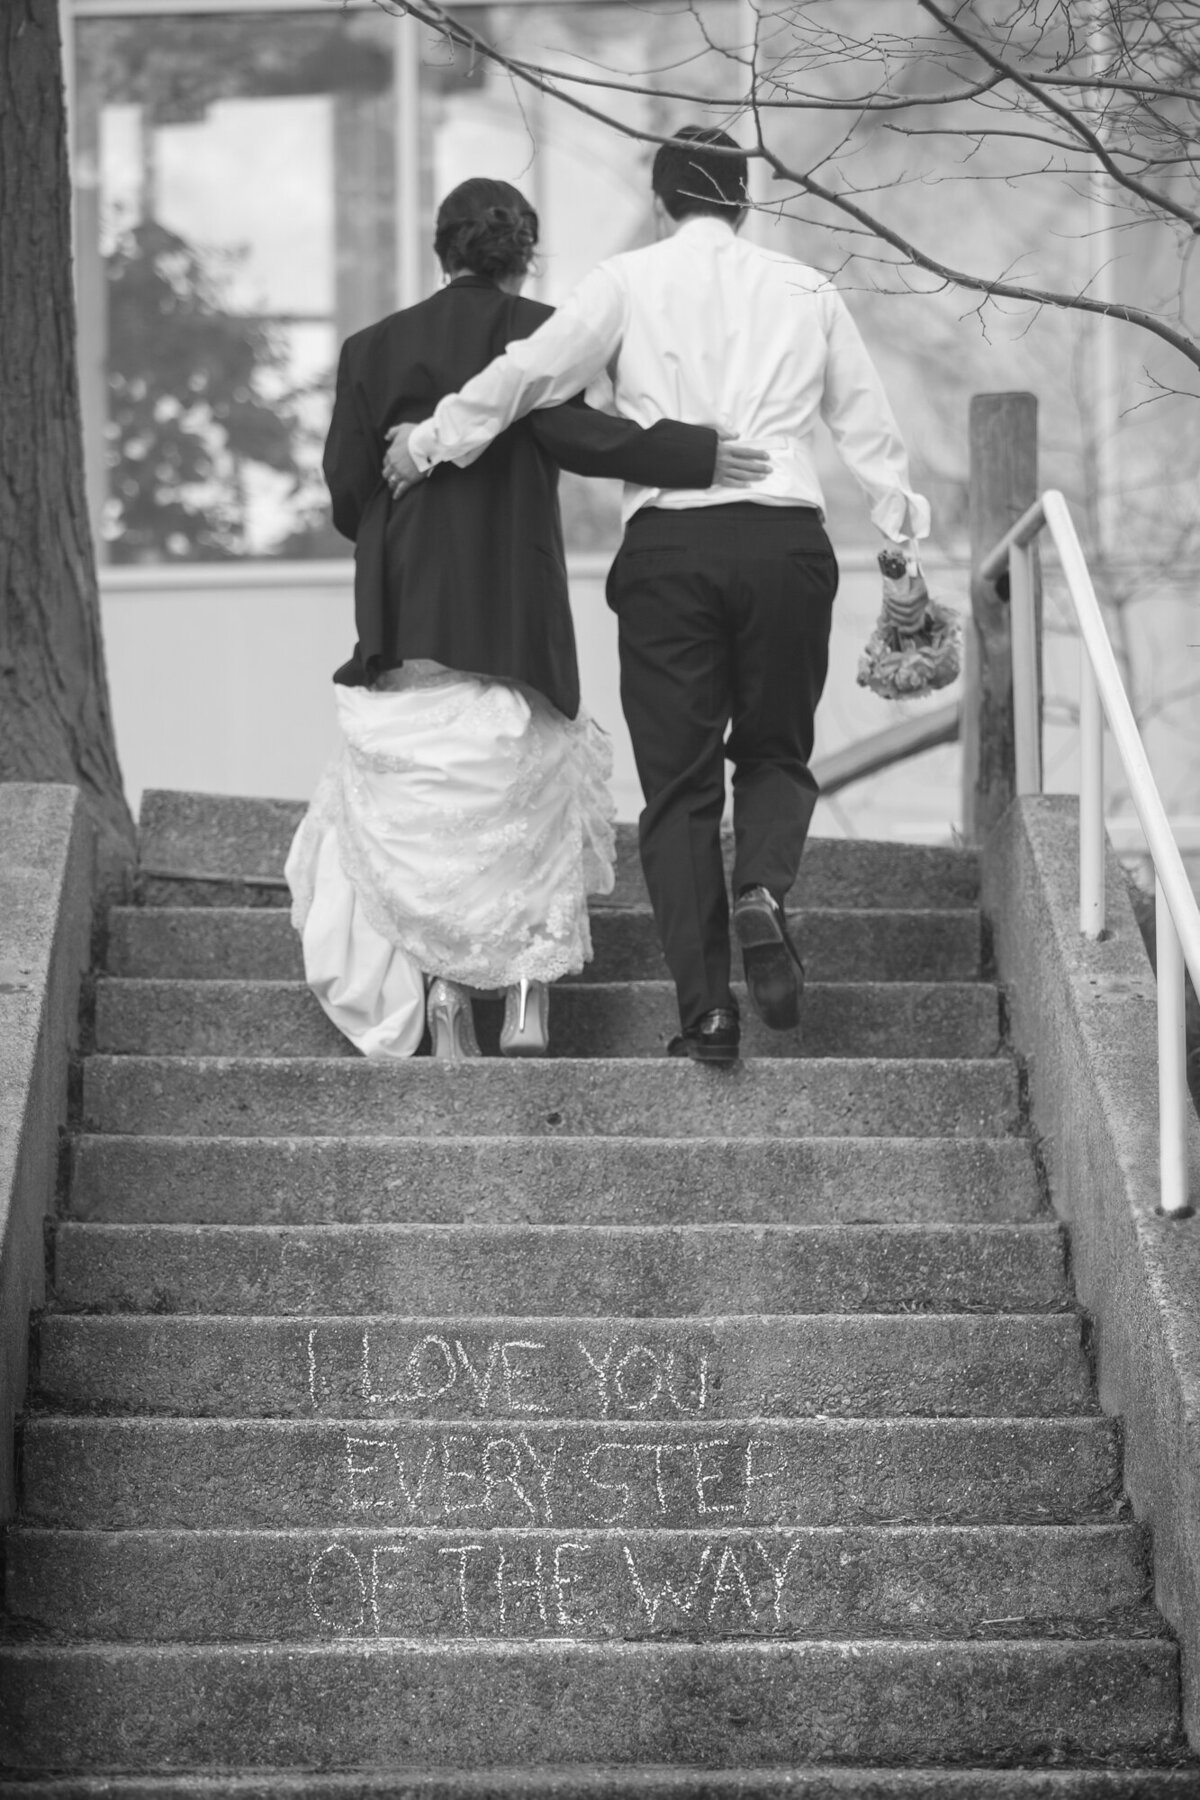 A creative message is written on the stairs for a bride and groom.